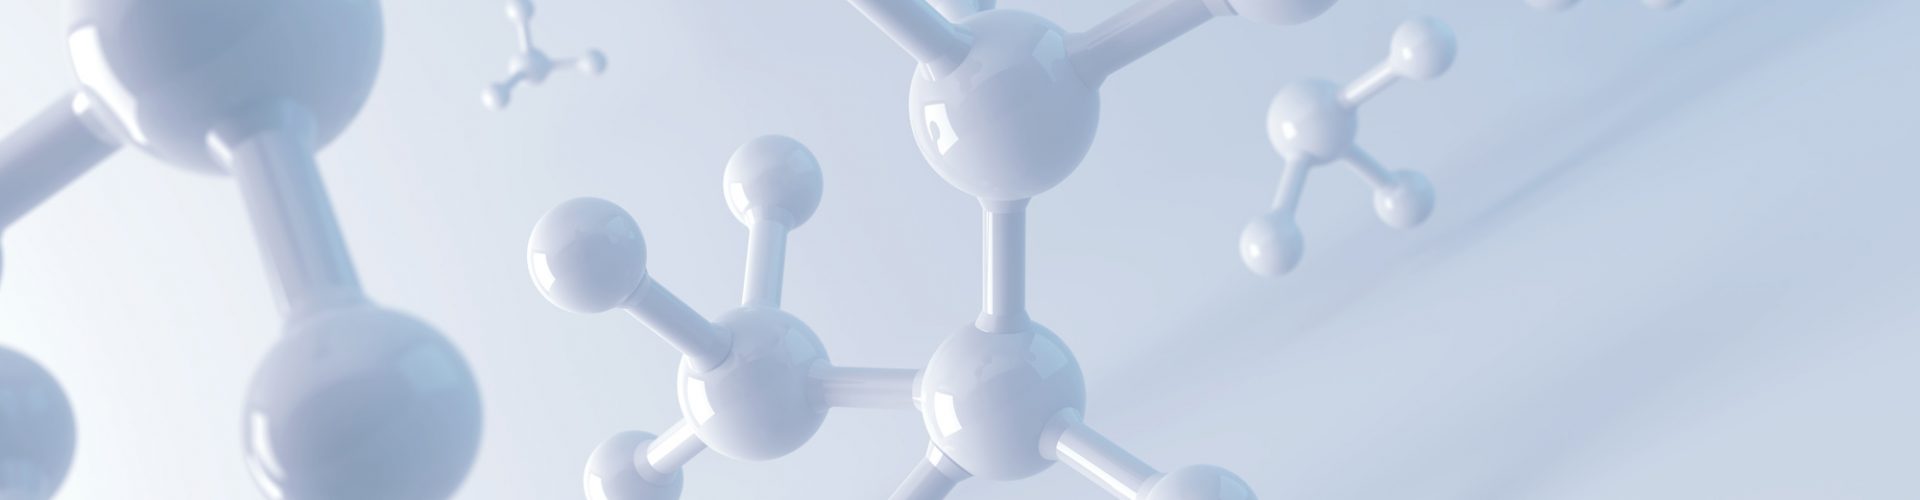 white molecule or atom, Abstract Clean structure for Science or medical background, 3d illustration.